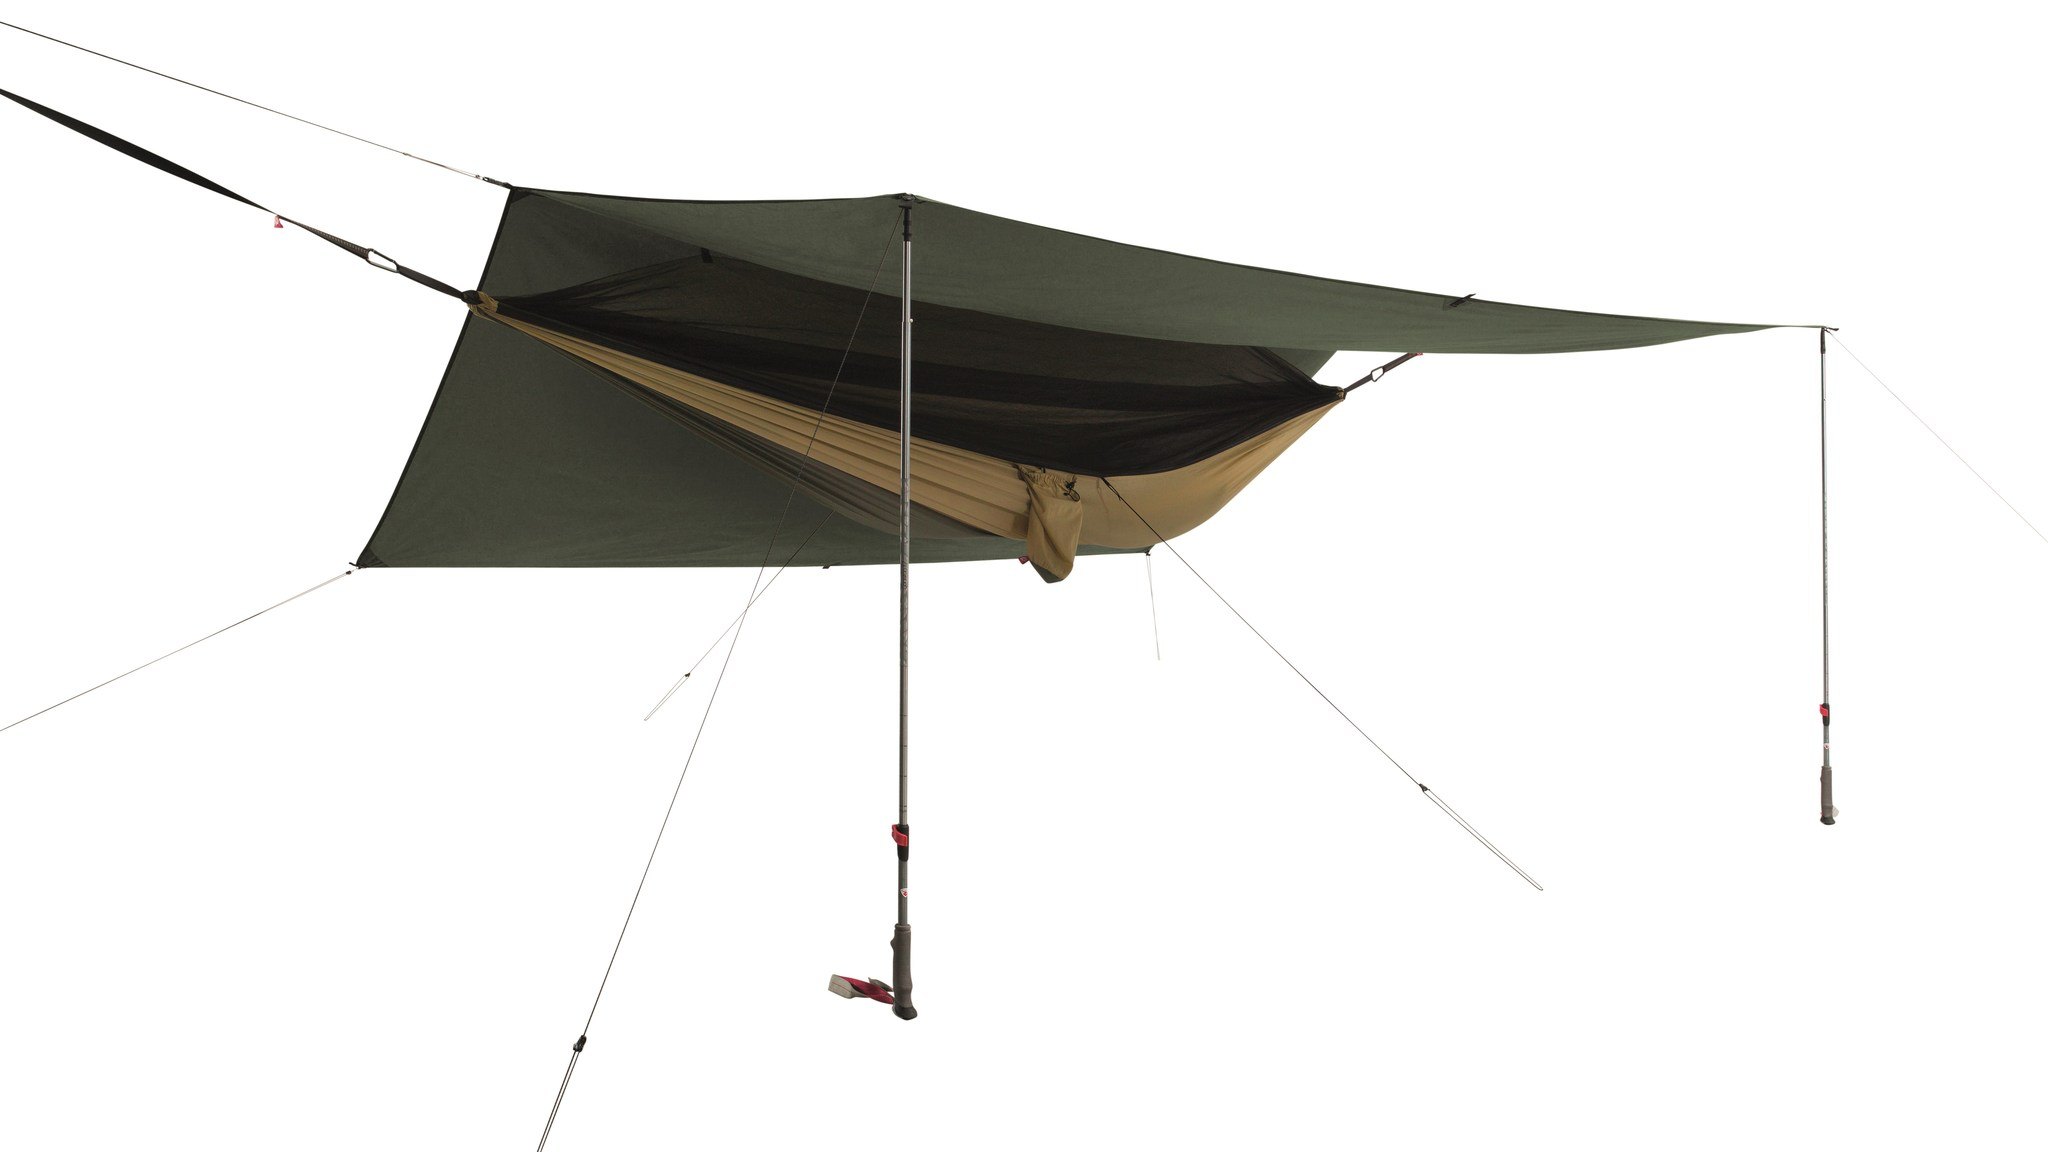 Additional tarp support with walking pole